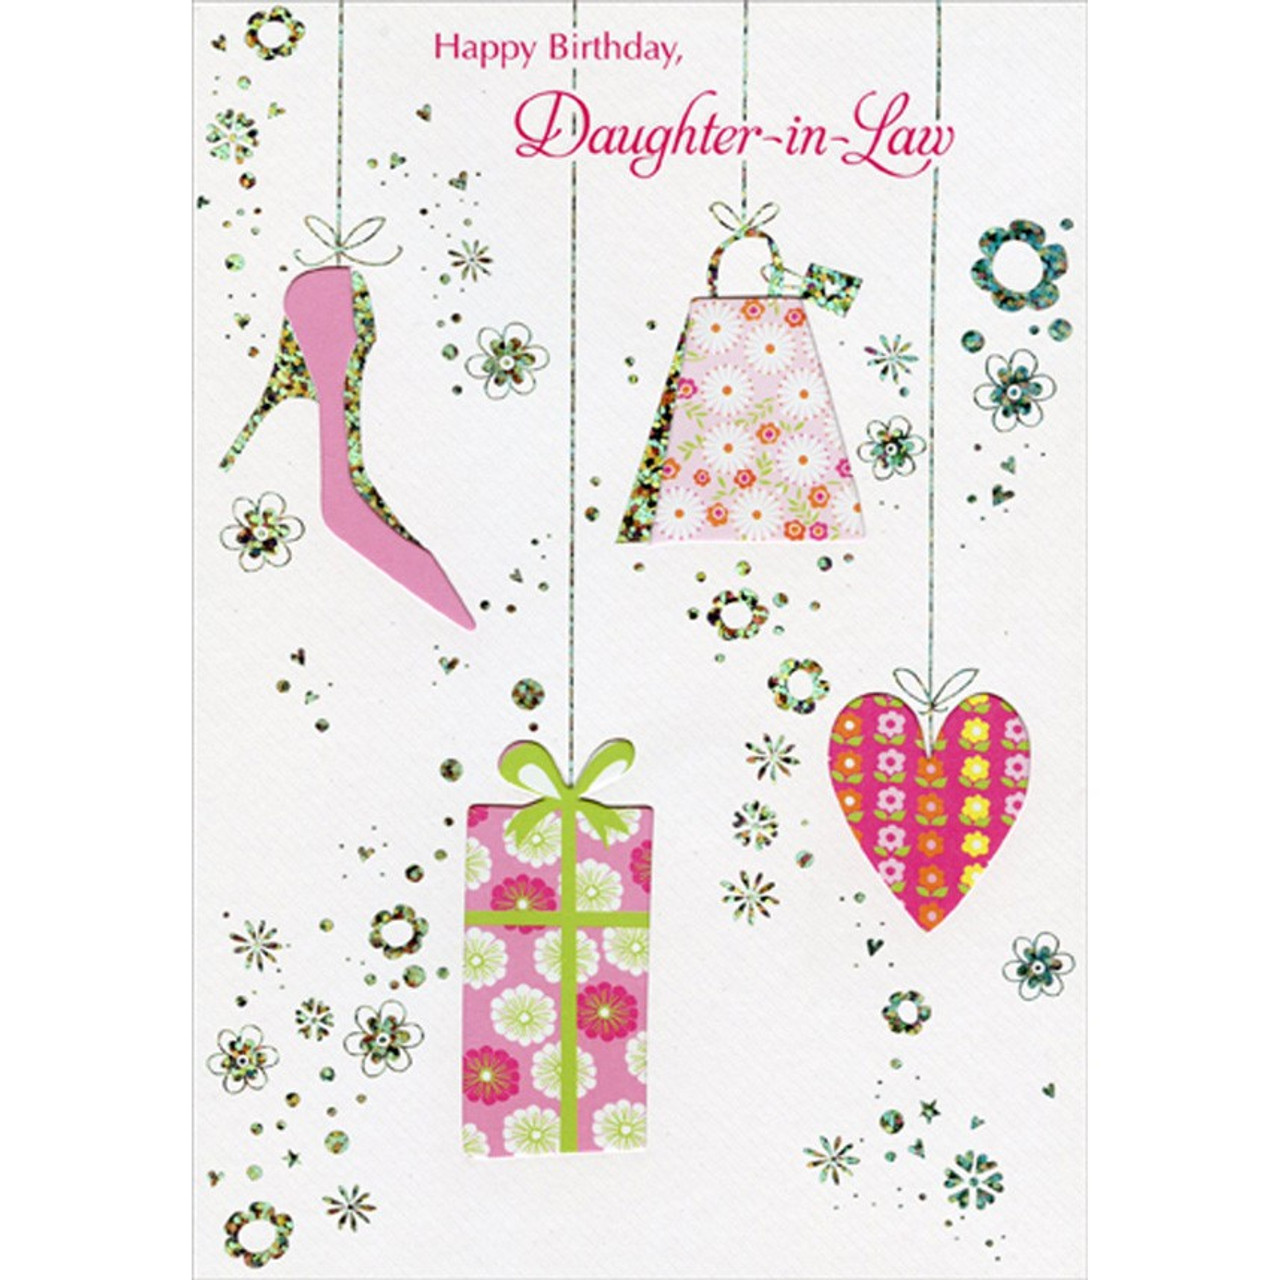 happy birthday cards for daughter